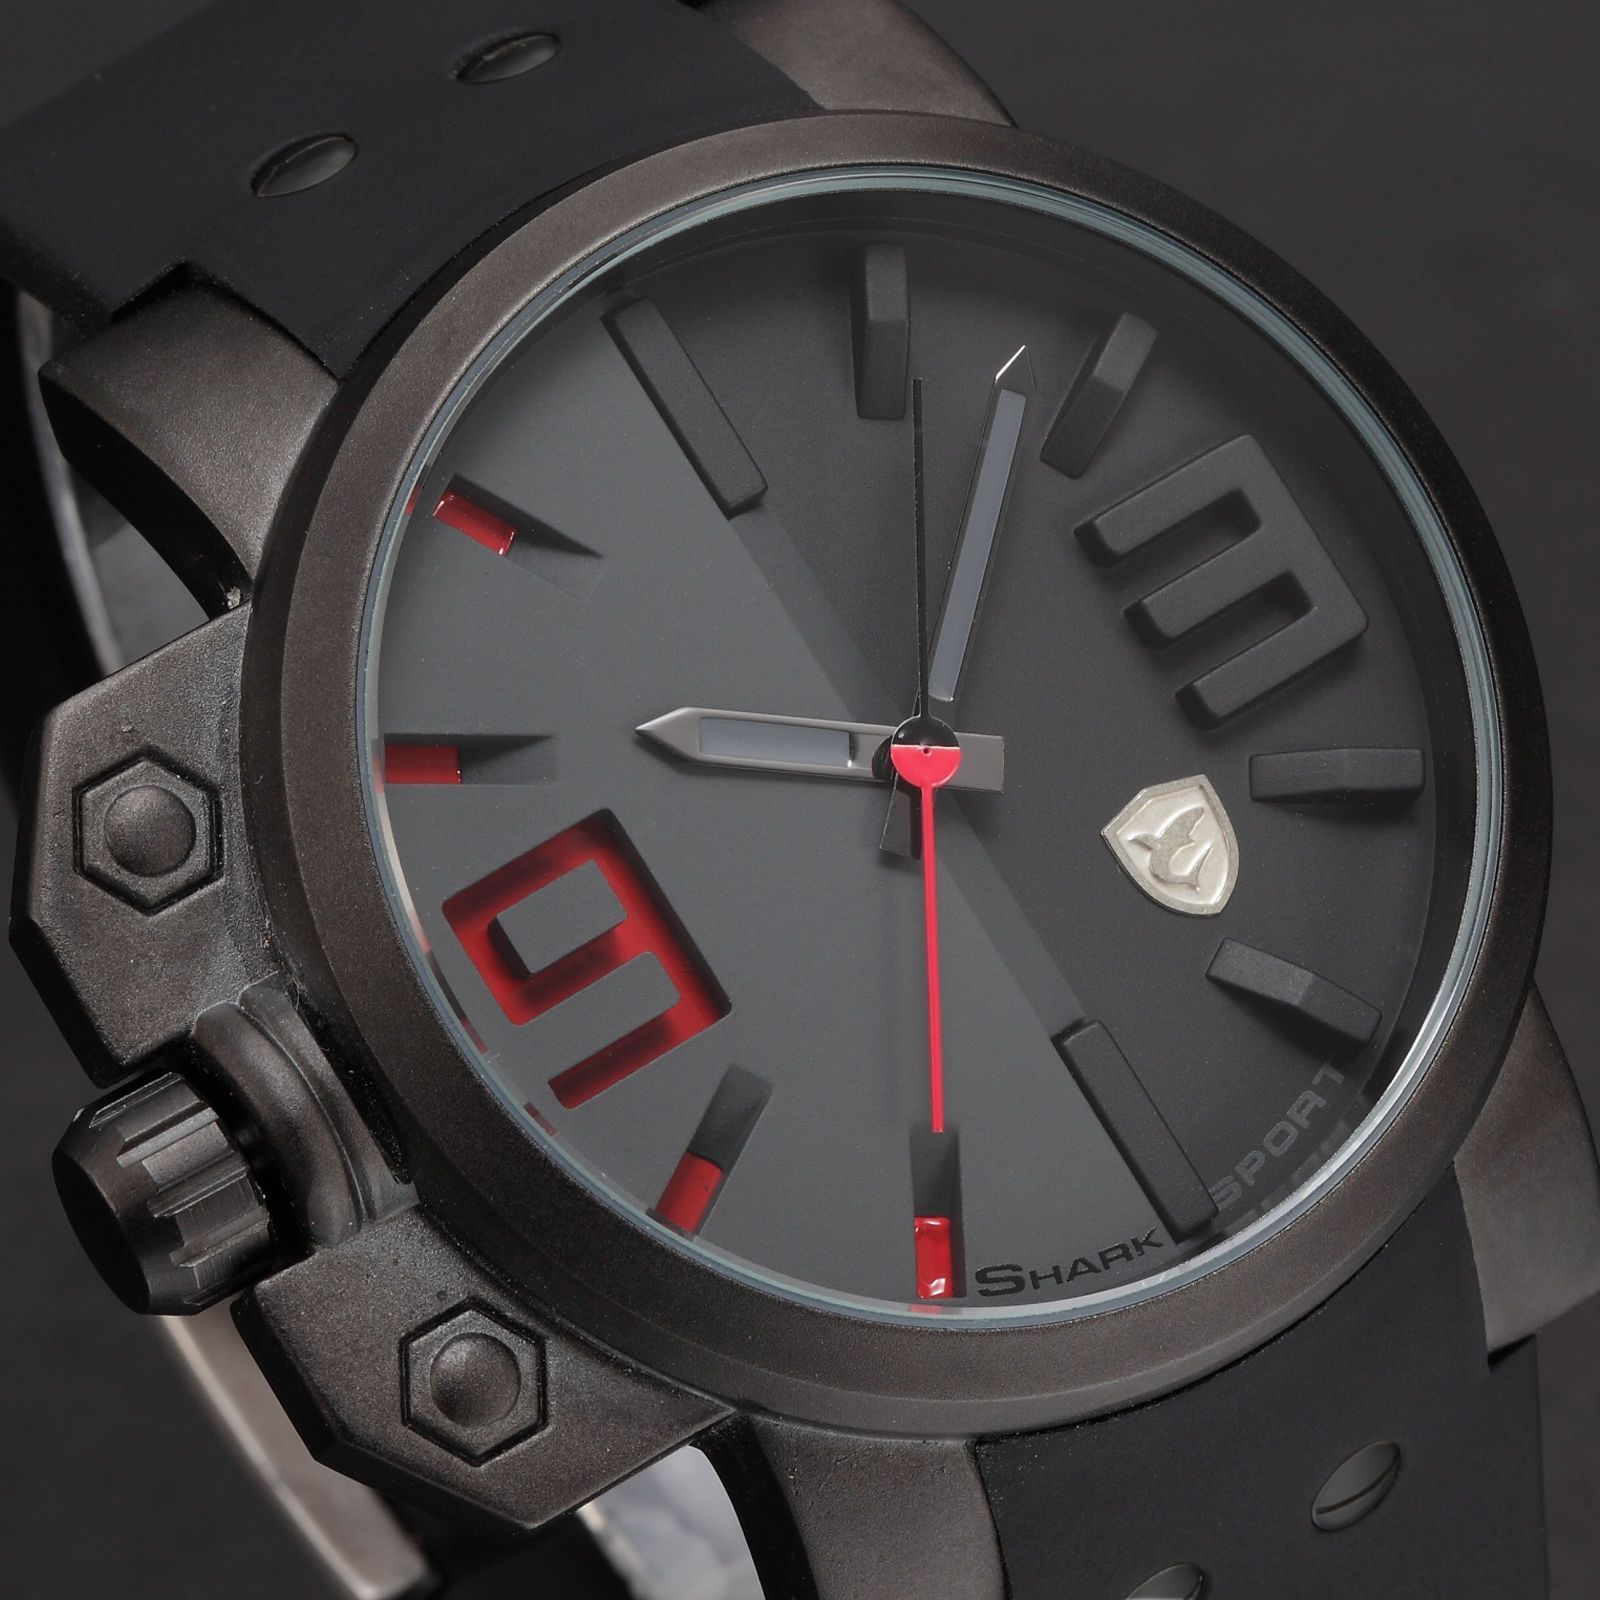 Shark Fashion Men Sports Wrist Watch Black Red 3D Dial Silicone Band